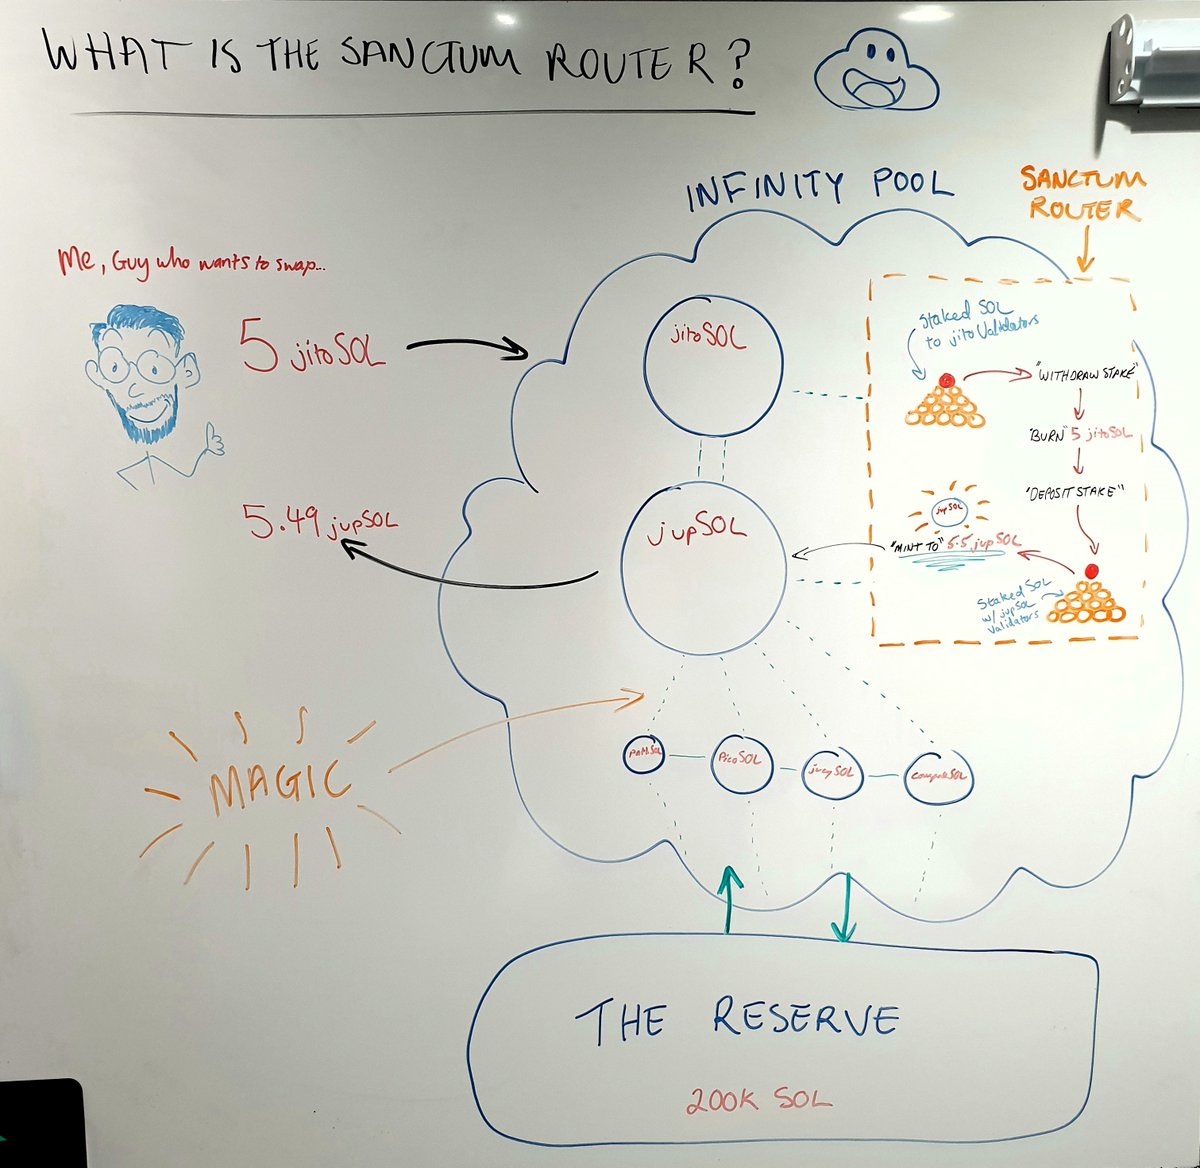 I spent weeks trying to figure out what the 'Sanctum Router' (@sanctumso) was and how it works.

Now I'm here to help you understand it too, in the only way I know how...

With crude whiteboard drawings and a conversational tone.

🧵/